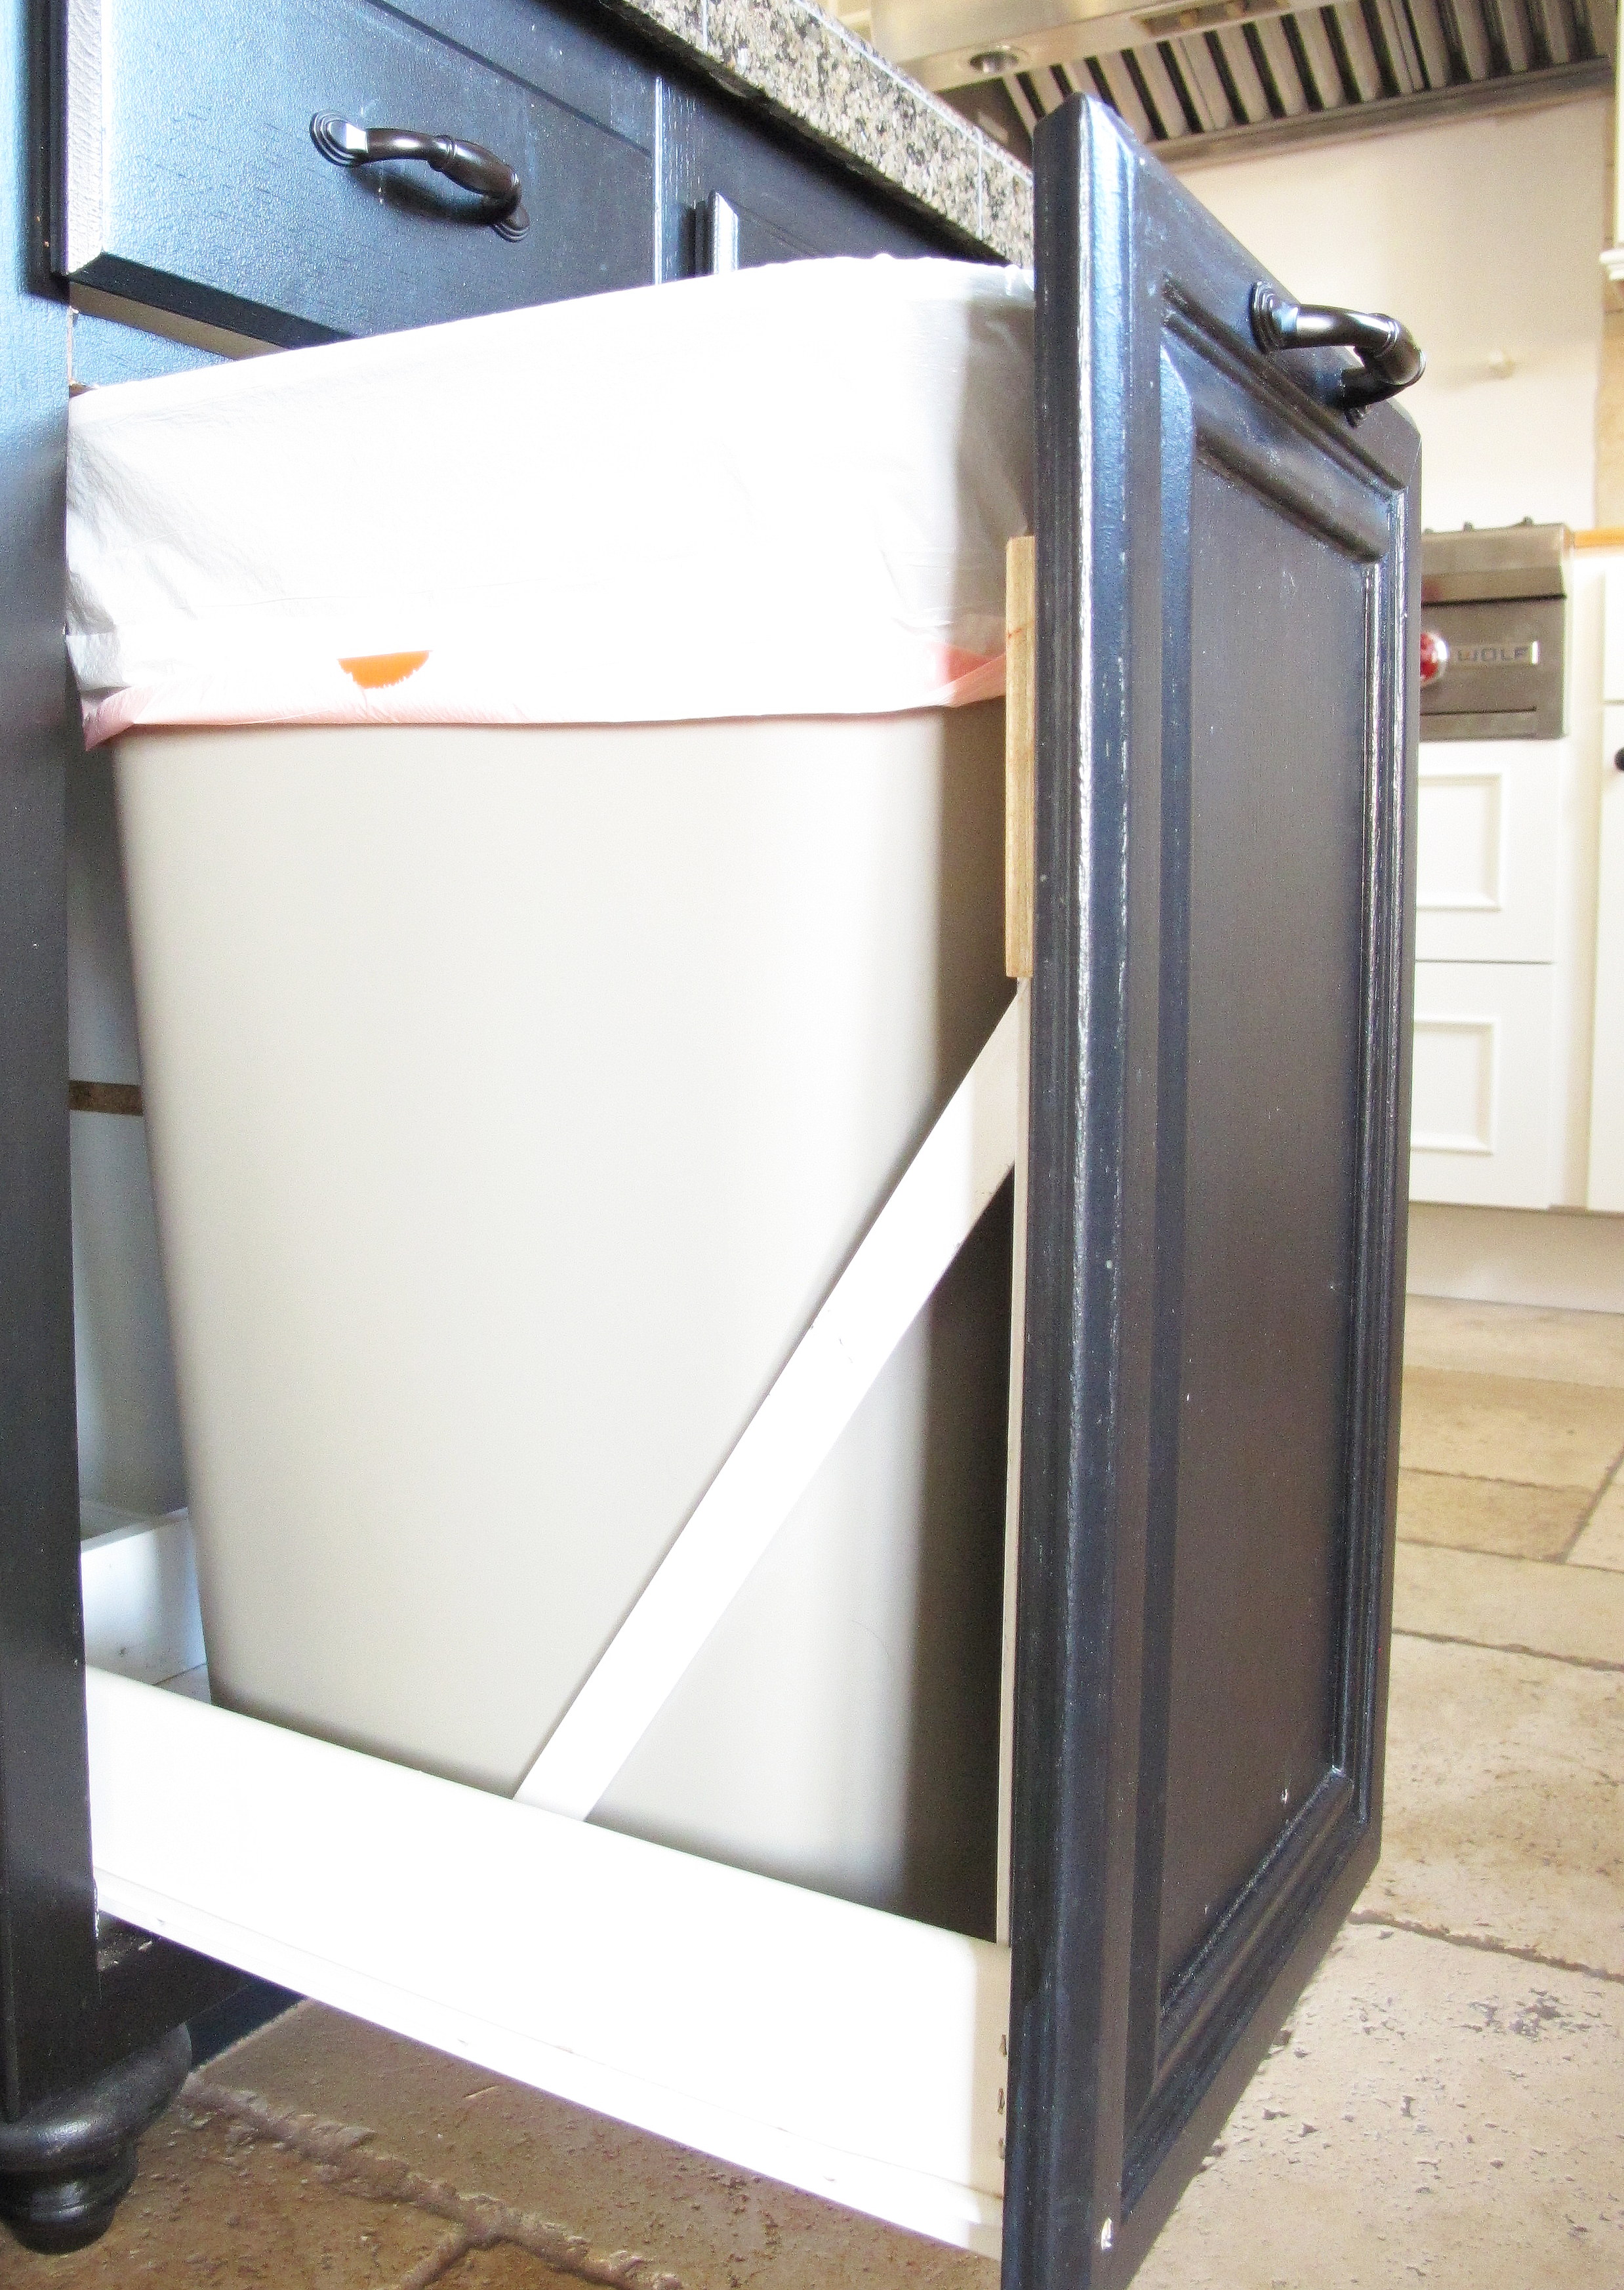 How to Build a Trash Can Cabinet with Pull Out Drawer - The Easy way